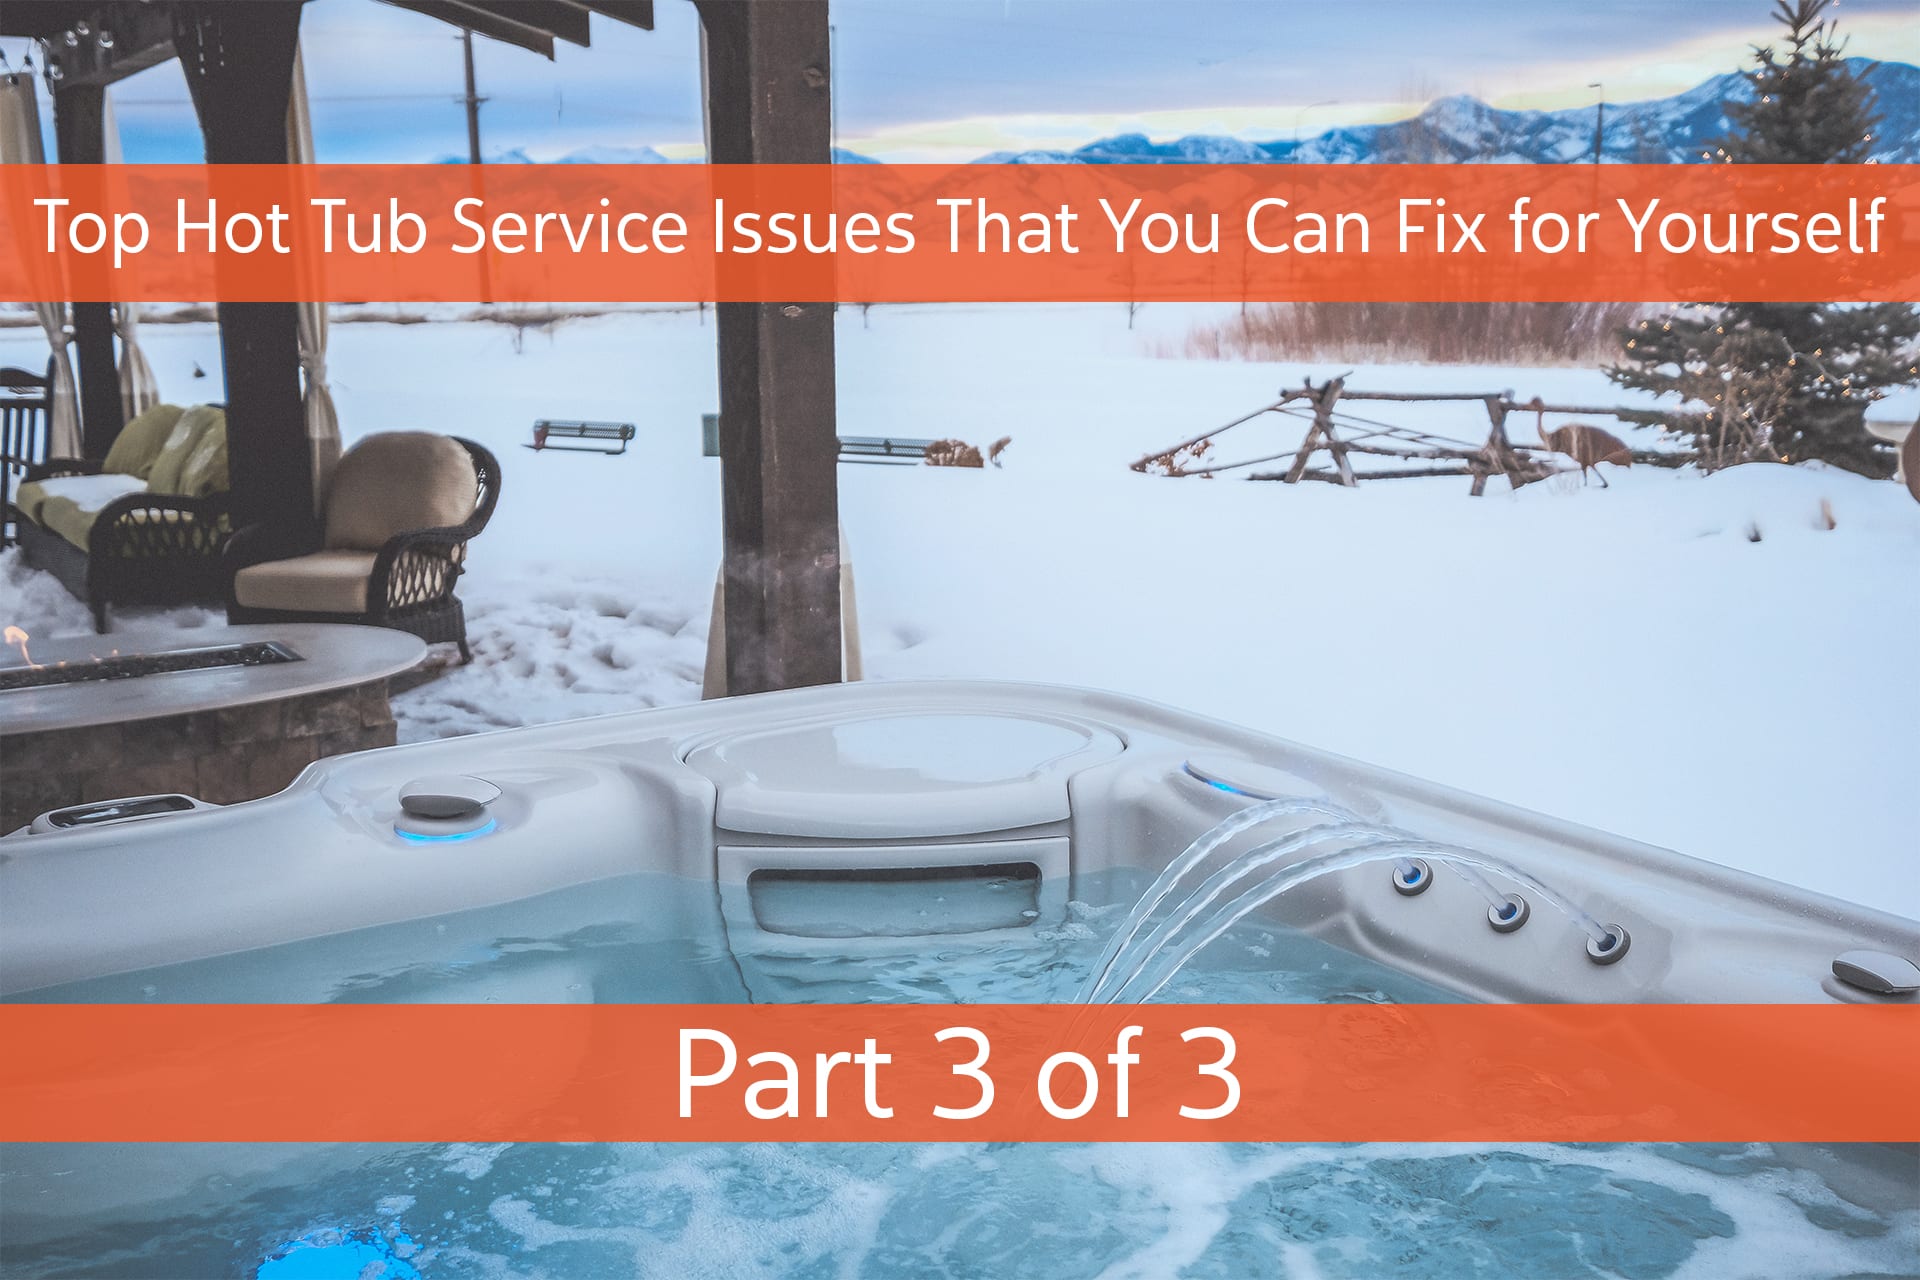 Top Hot Tub Service Issues That You Can Fix for Yourself – Part 3 of 3